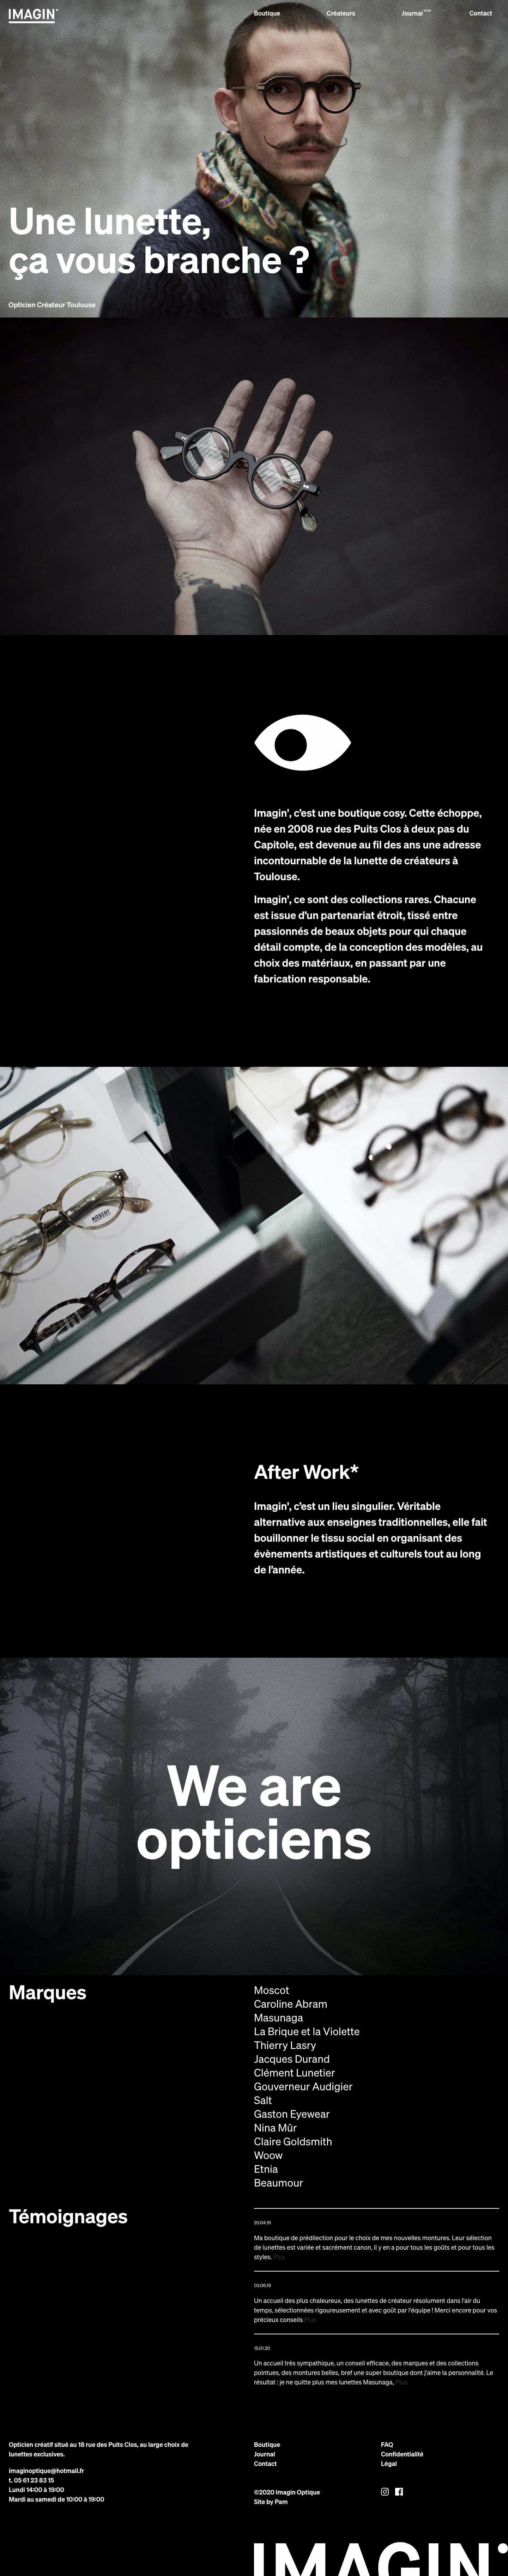 Imagin Optique Landing Page Example: Creative optician located at 18 rue des Puits Clos, with a wide choice of exclusive glasses.